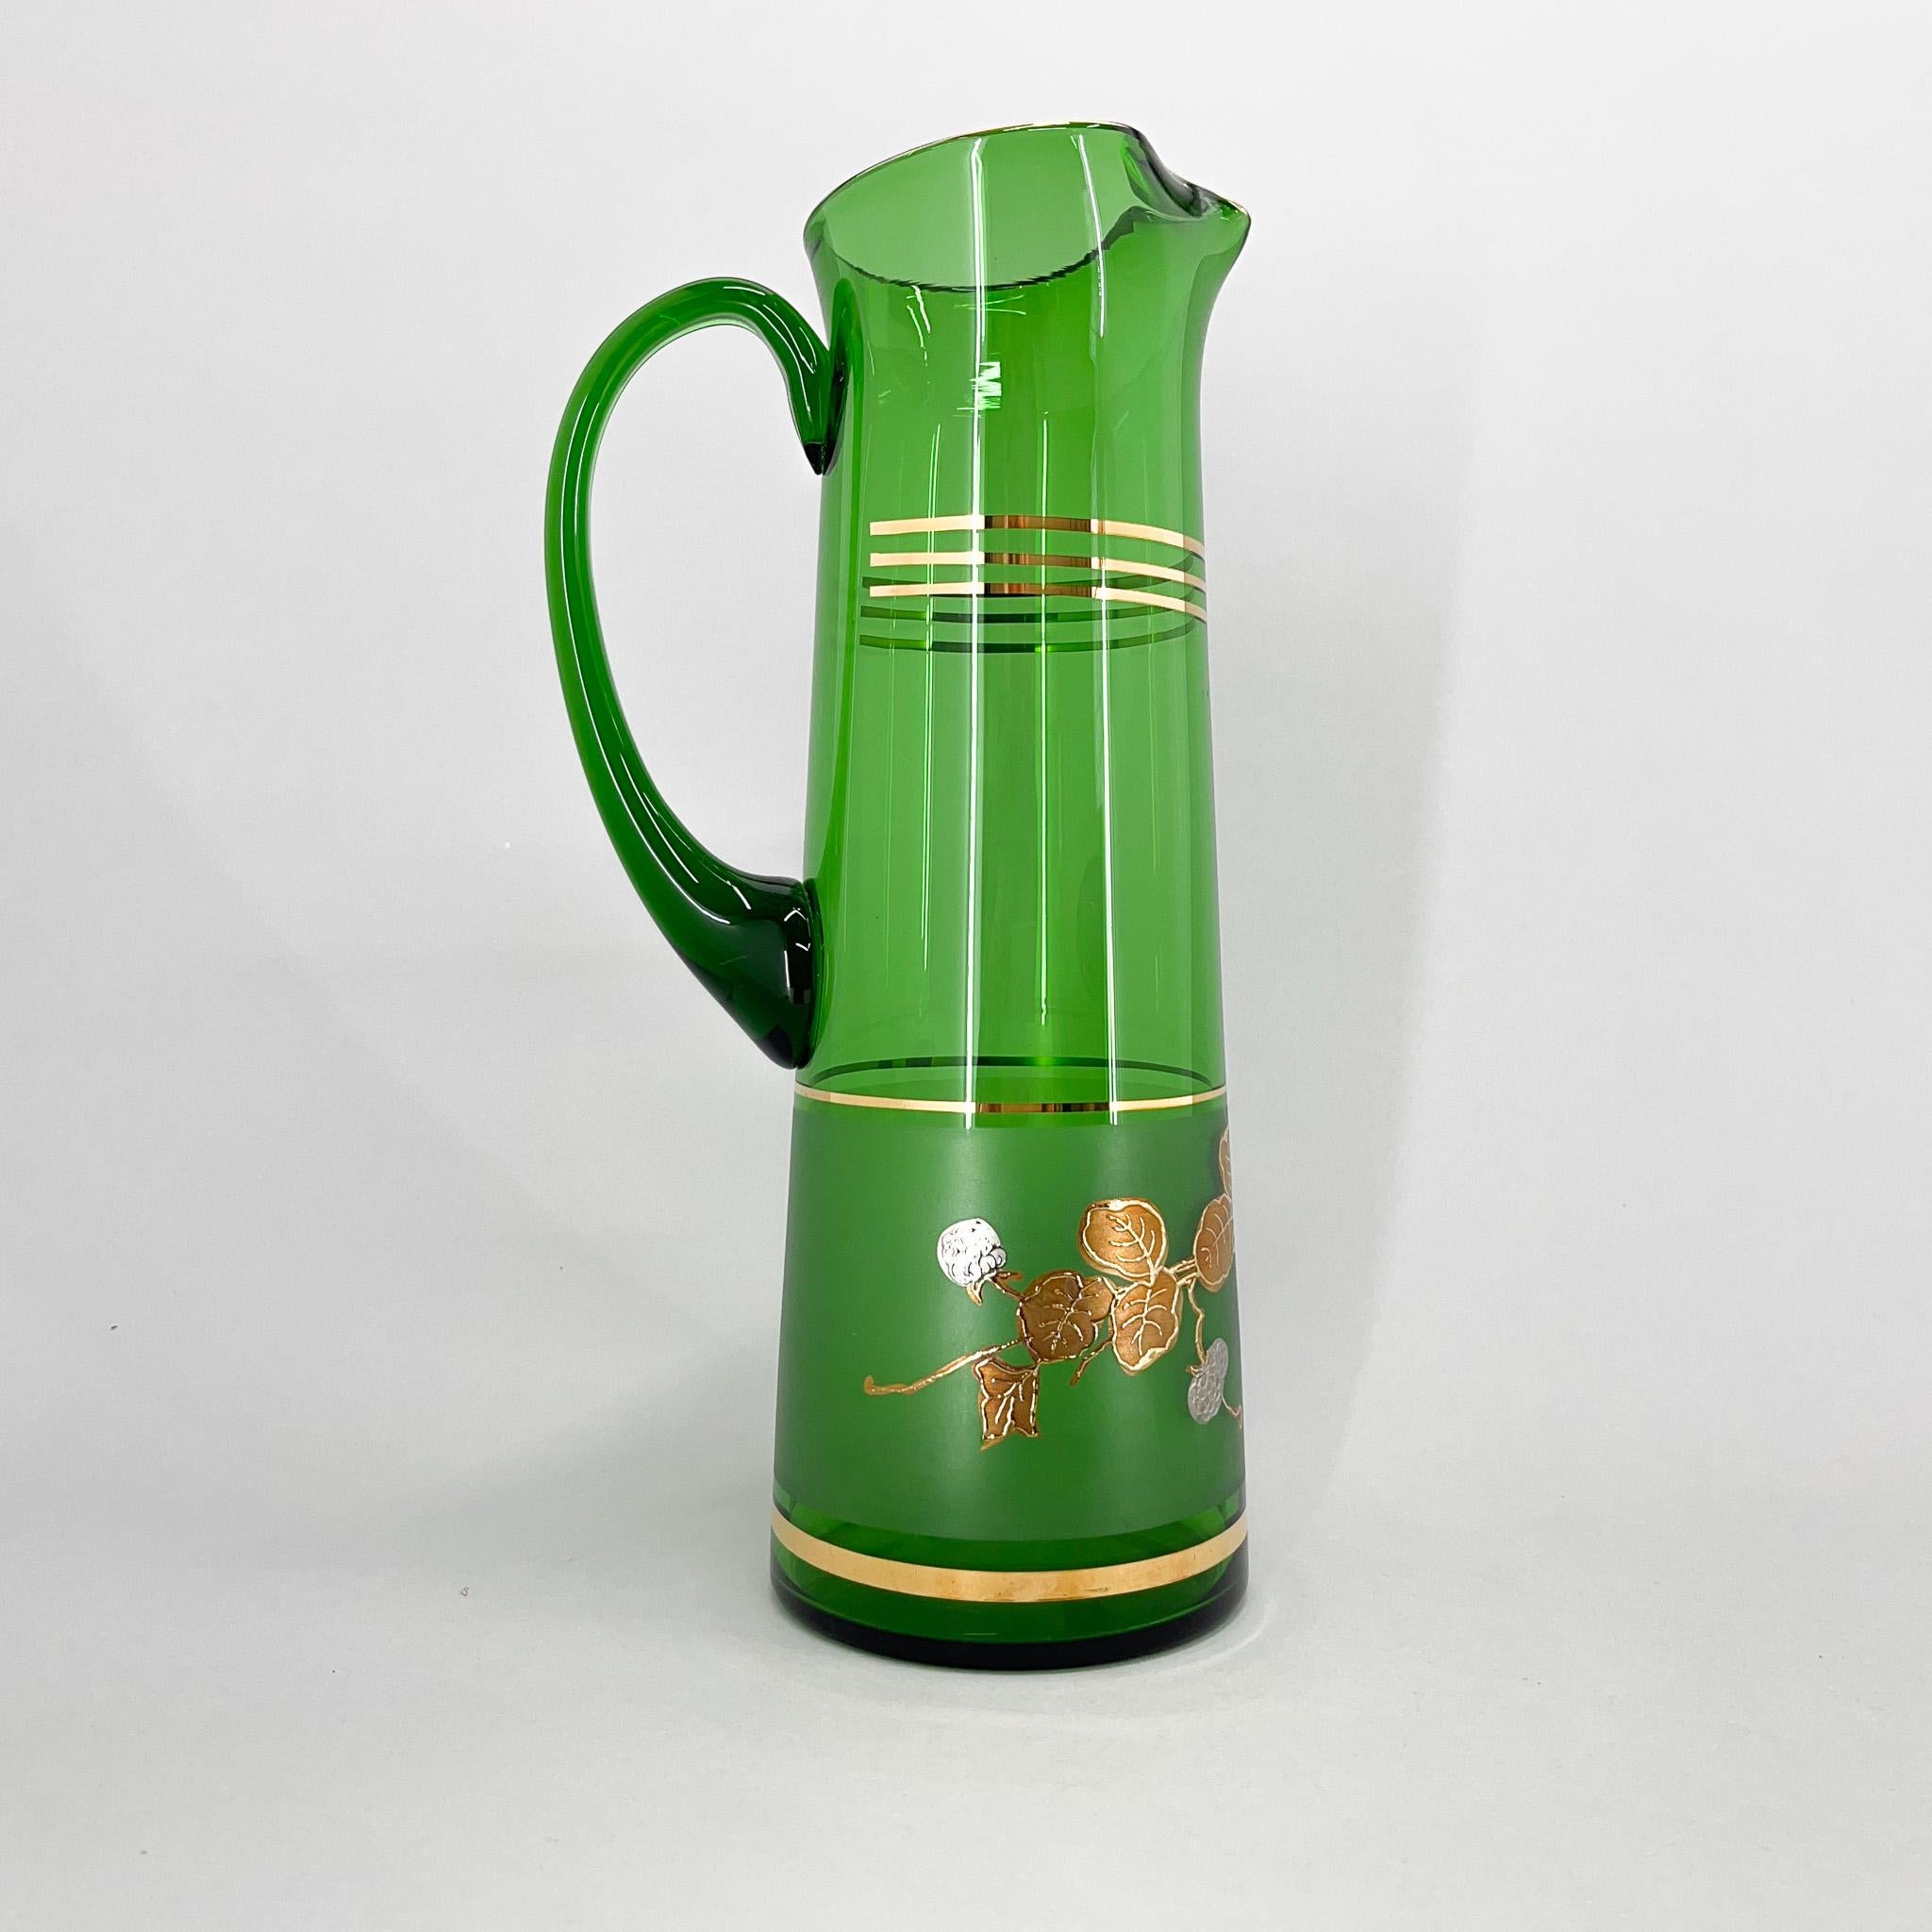 Midcentury tall green glass jug with golden decor. Made in former Czechoslovakia in the 1970s.